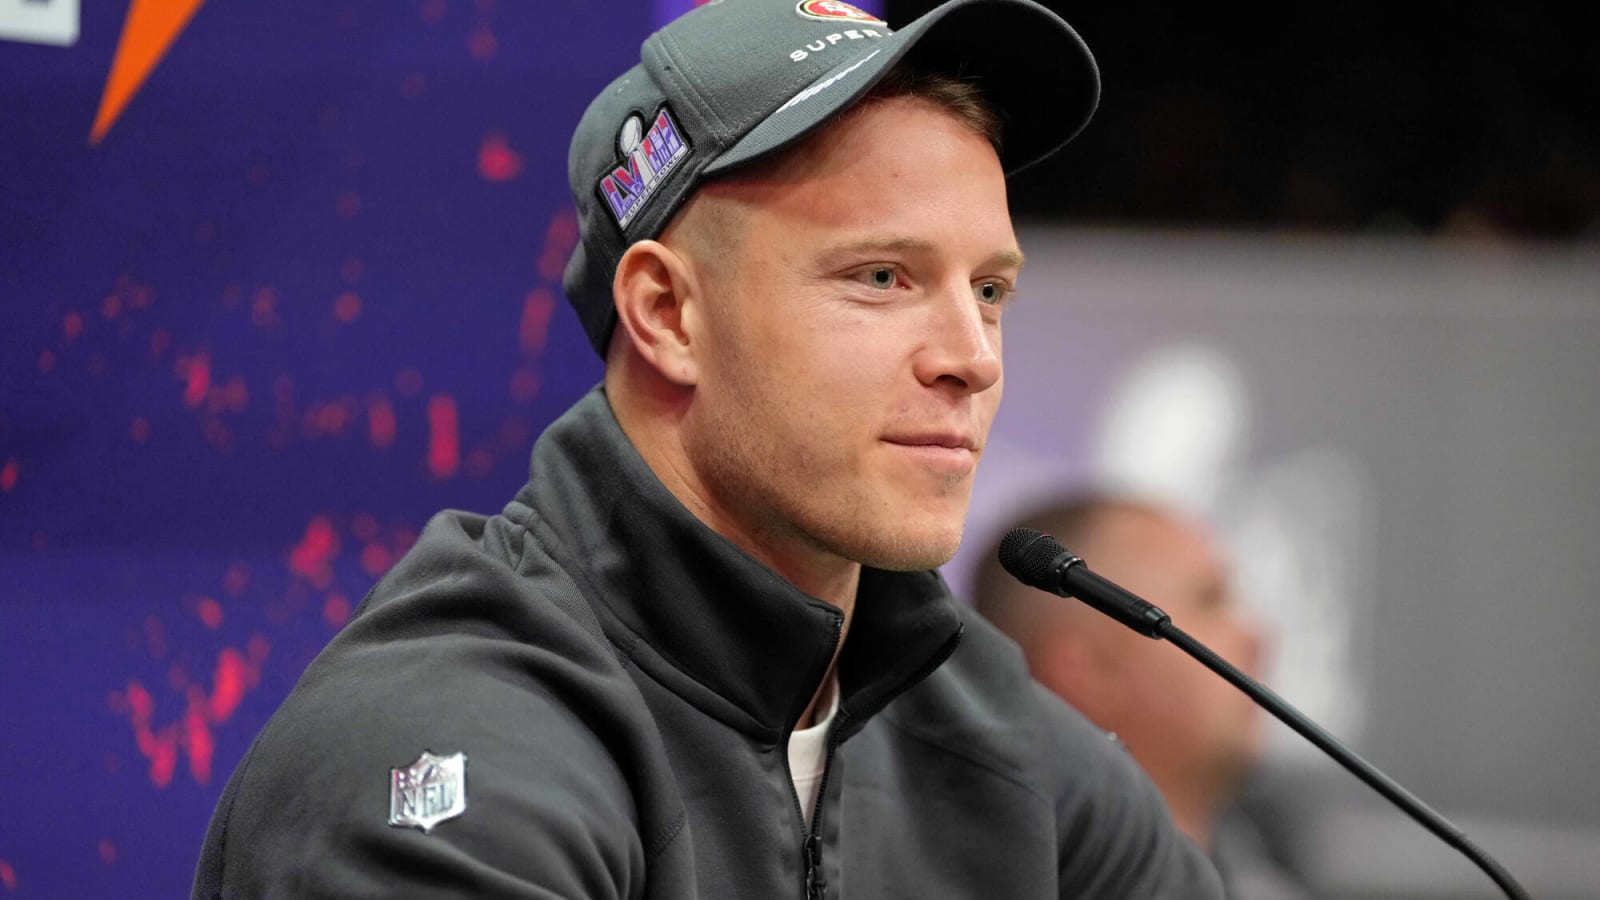 49ers RB Christian McCaffrey on why football is the greatest sport, working with Kyle Shanahan